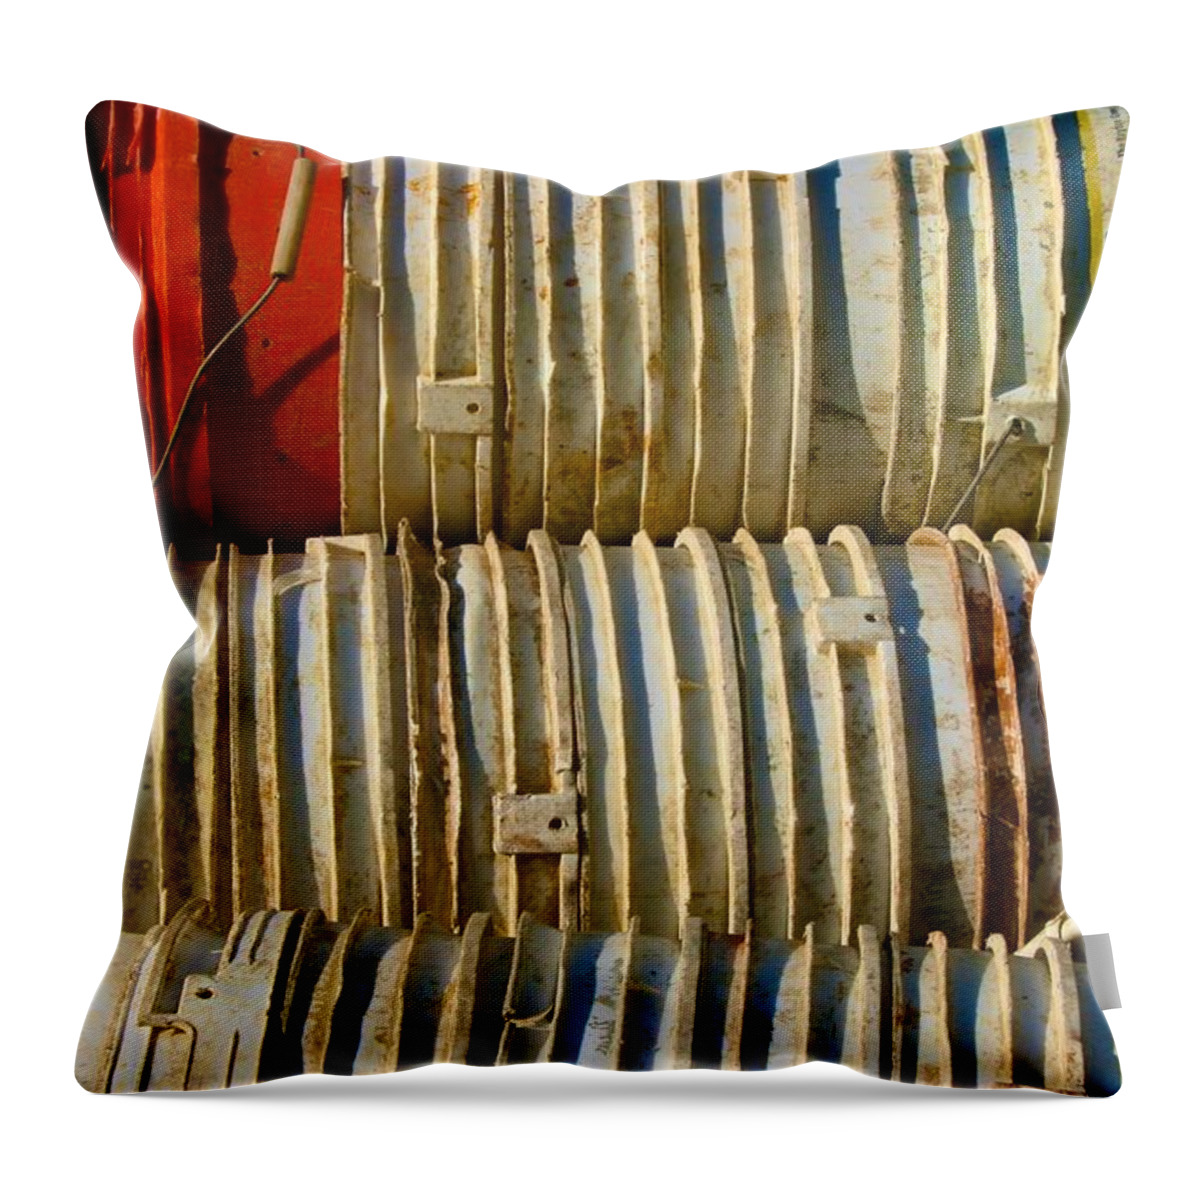 Other Throw Pillow featuring the photograph Construction Buckets by Polly Castor